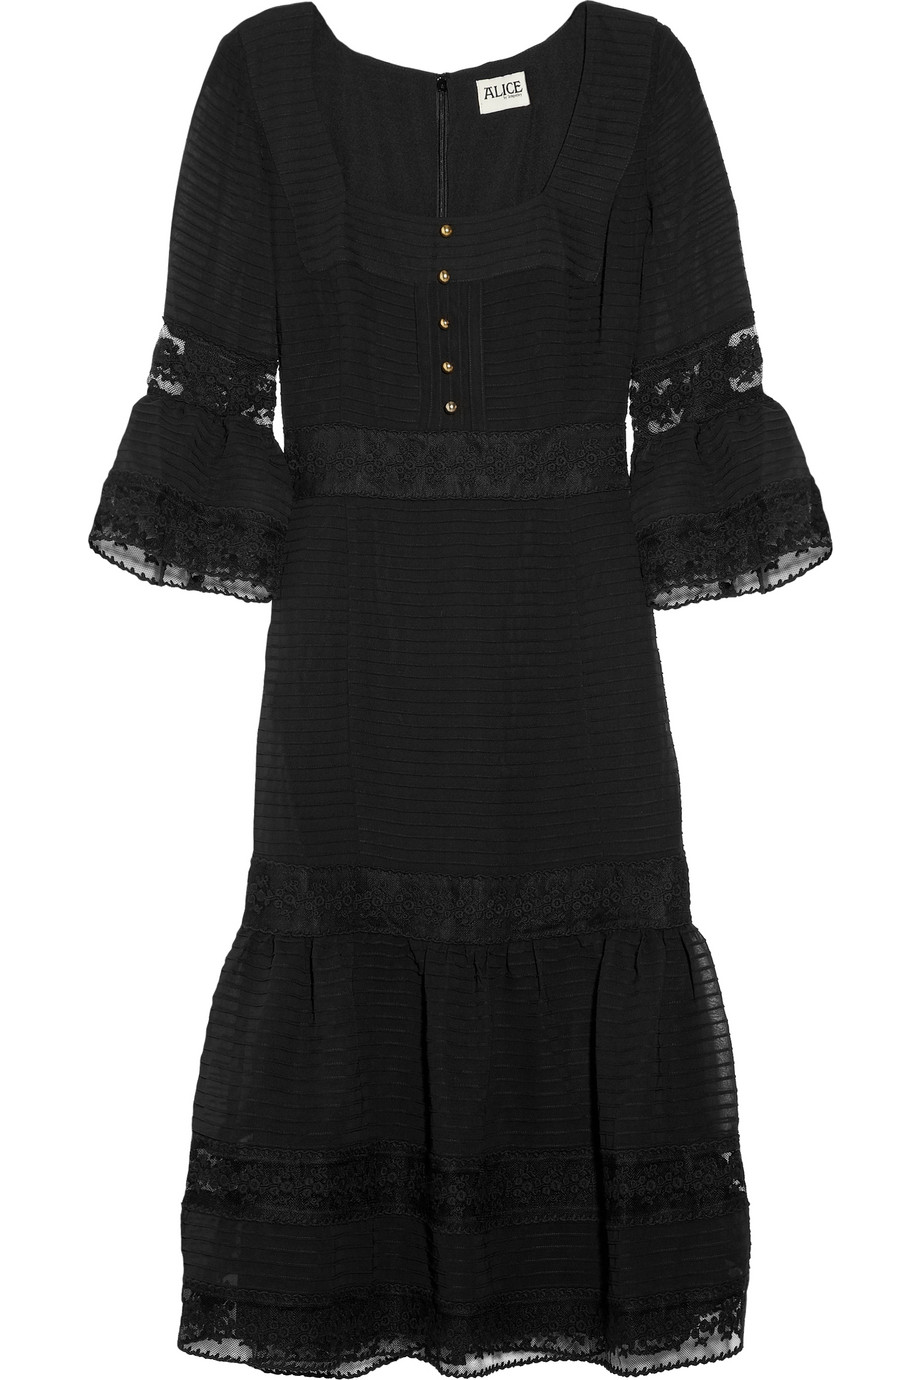 Alice by temperley Esmeralda Pleated Chiffon and Lace Dress in Black | Lyst